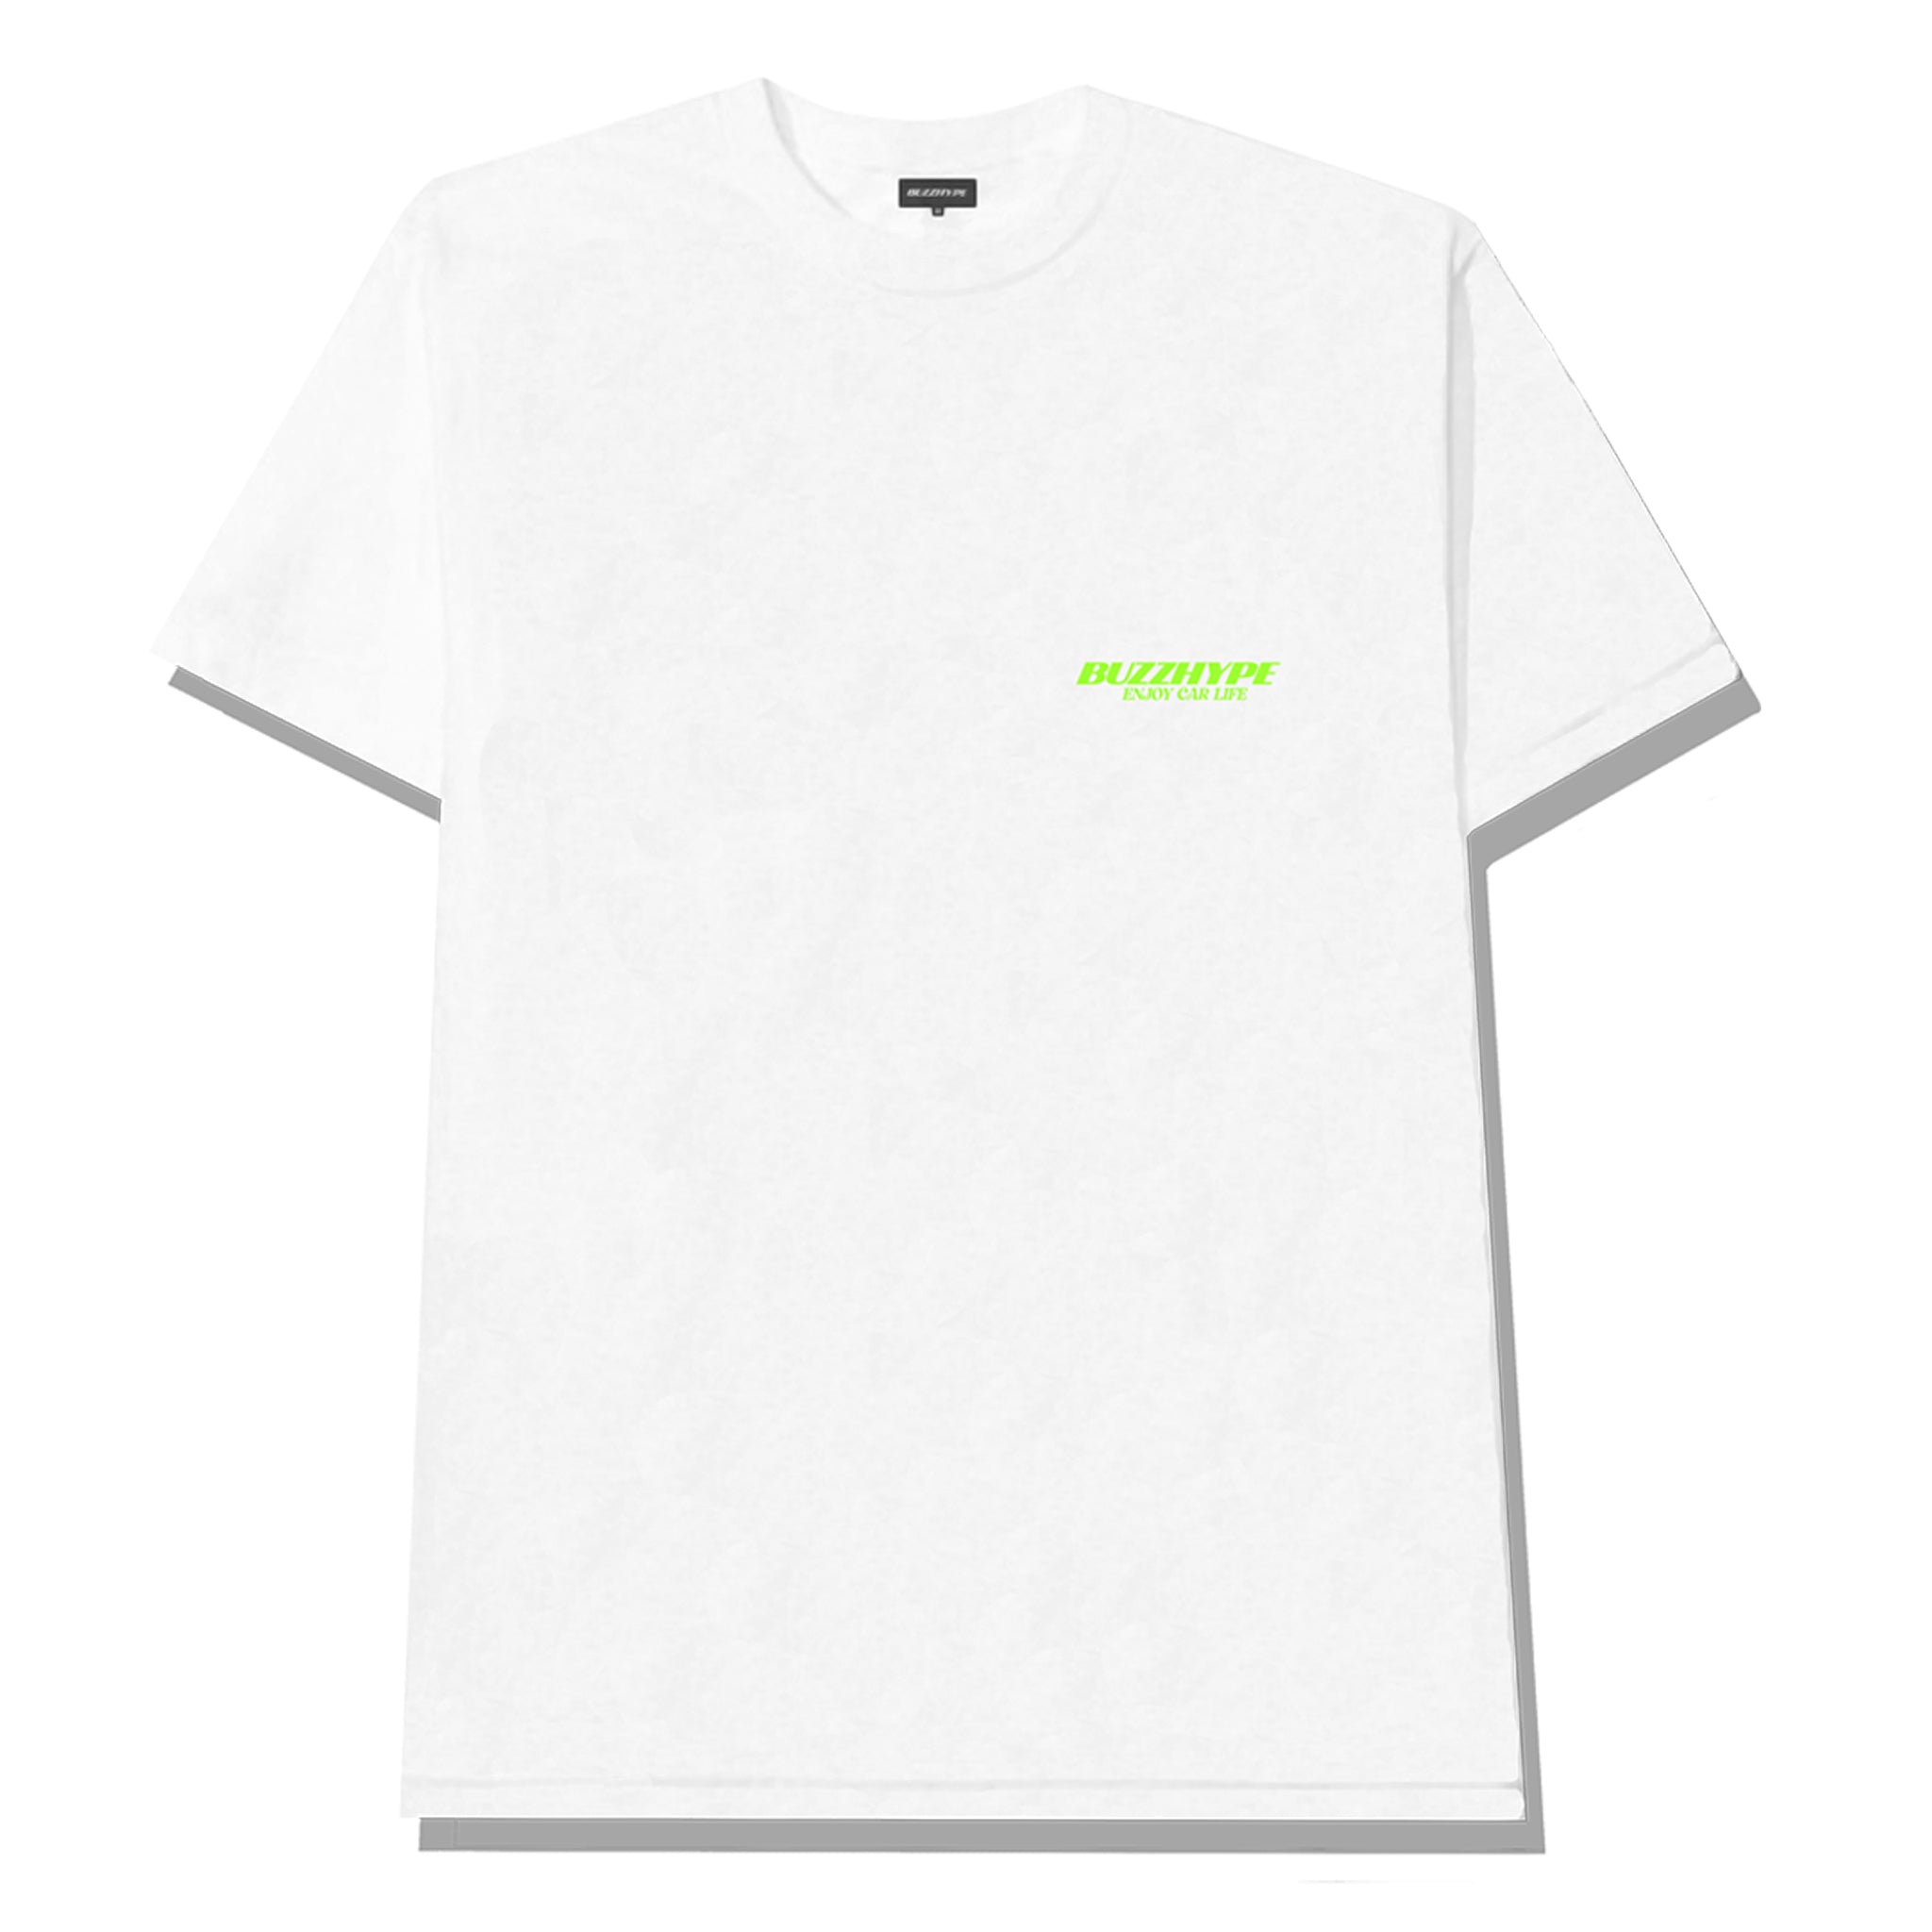 Endless Pursuit in White tee